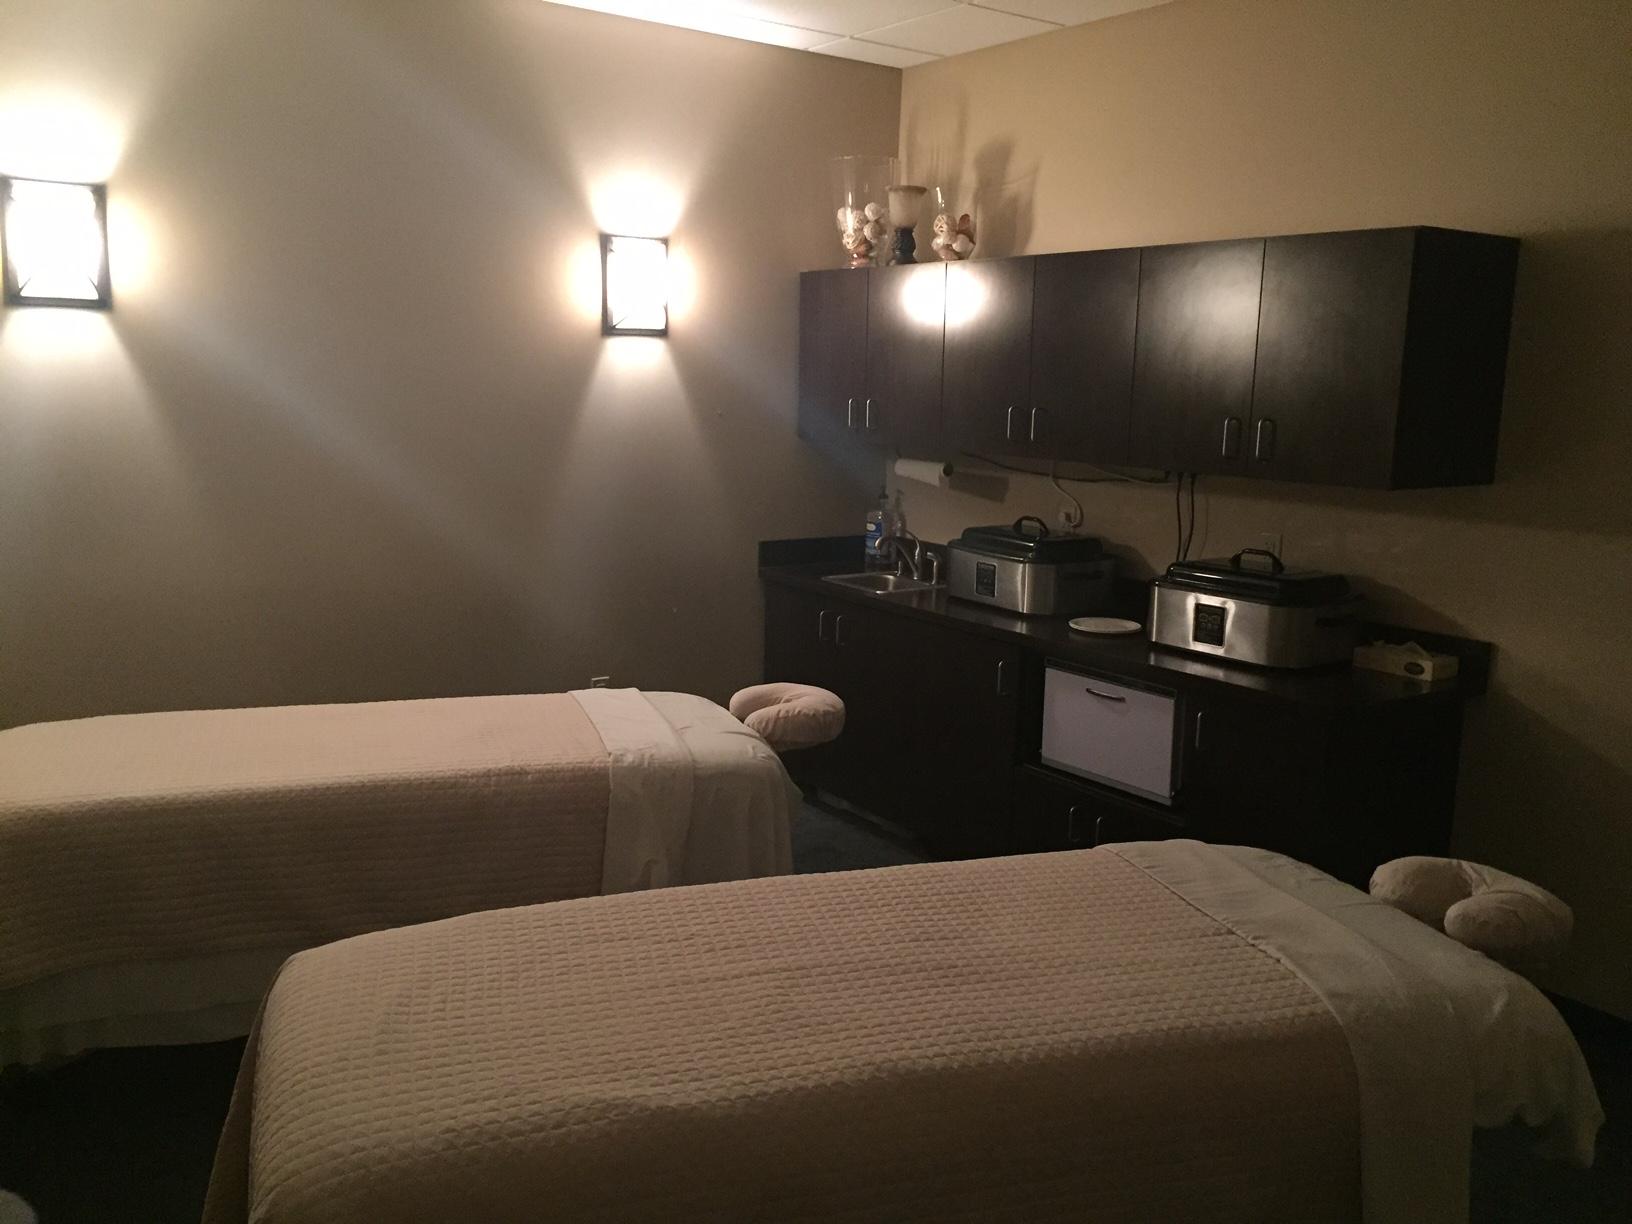 Hand & Stone Massage and Facial Spa Coupons Orlando FL near me | 8coupons